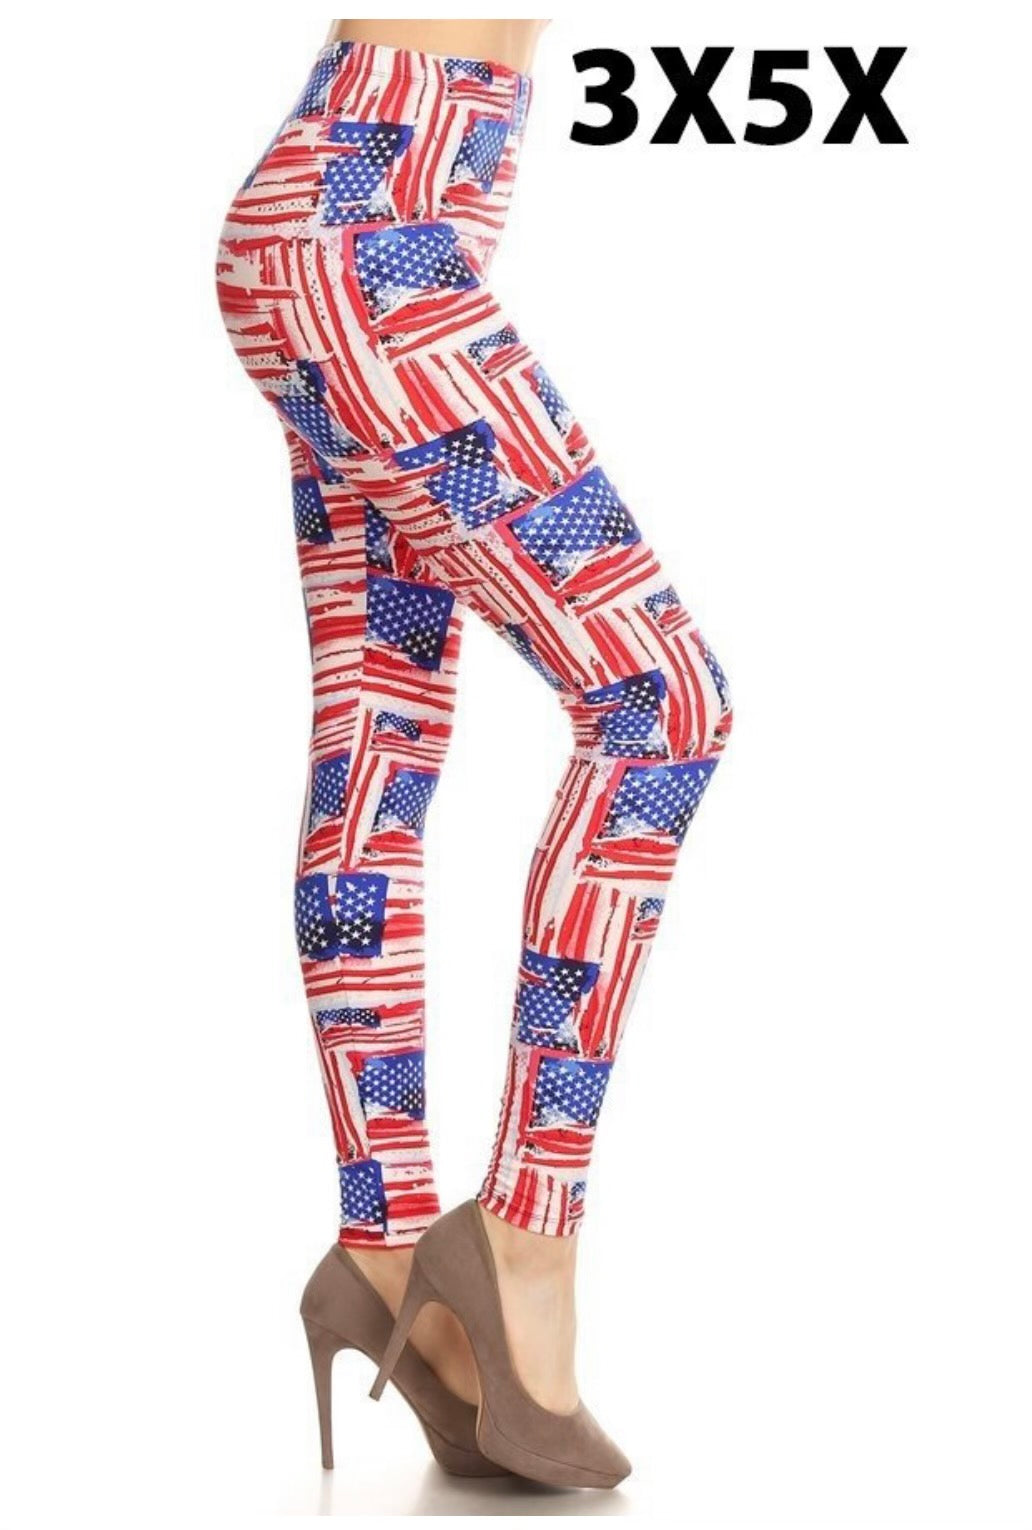 Horse Riding Leggings / Tights / Breeches with phone pockets -NAVY RED WHITE  – Eqcouture